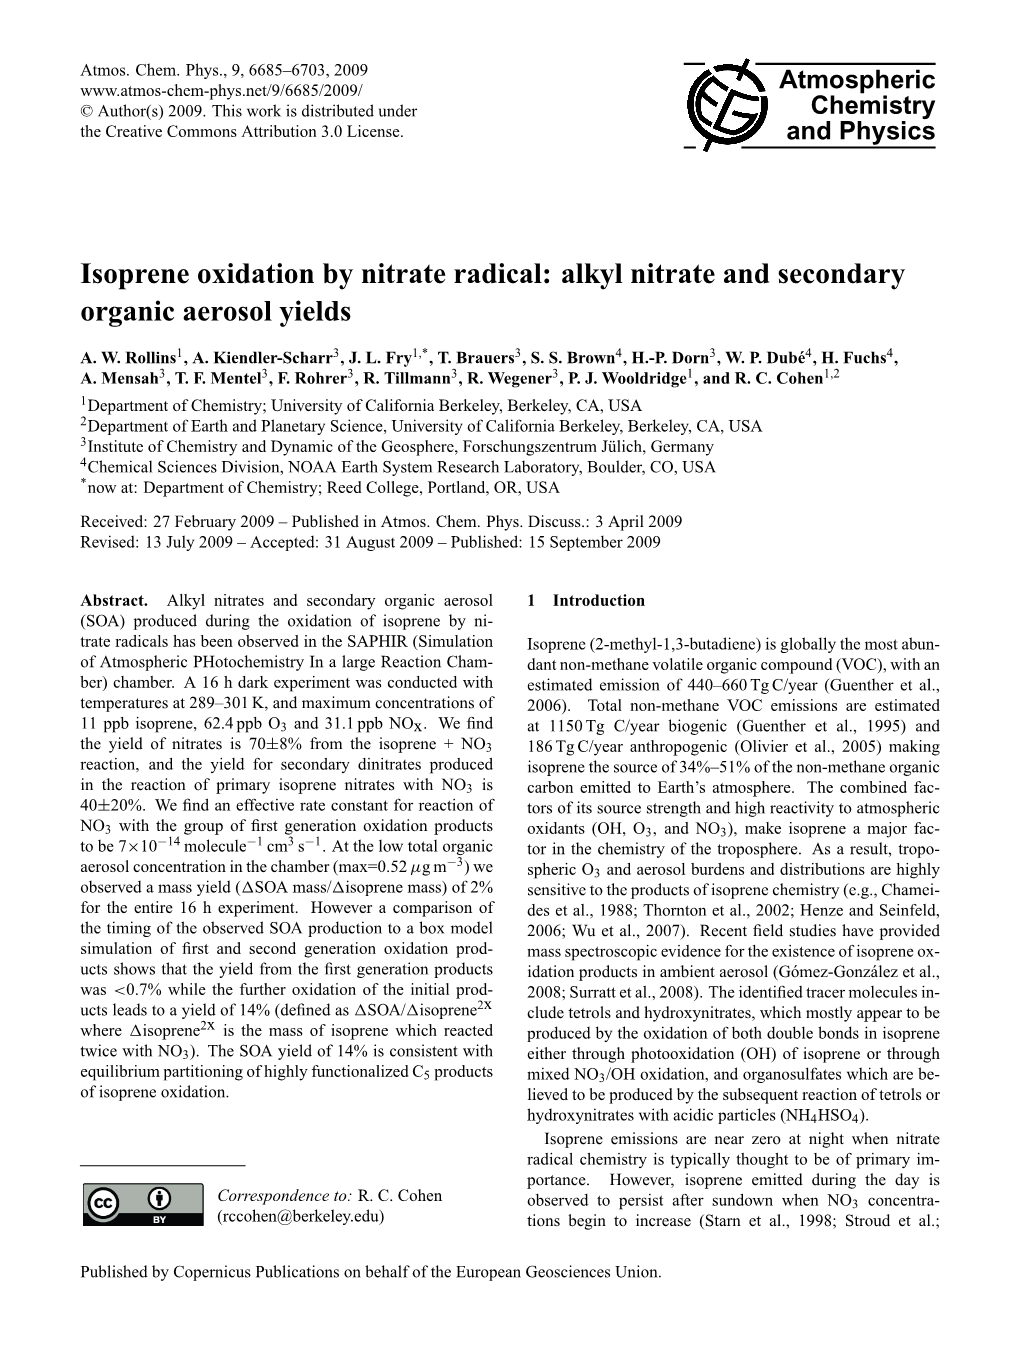 Isoprene Oxidation by Nitrate Radical: Alkyl Nitrate and Secondary Organic Aerosol Yields